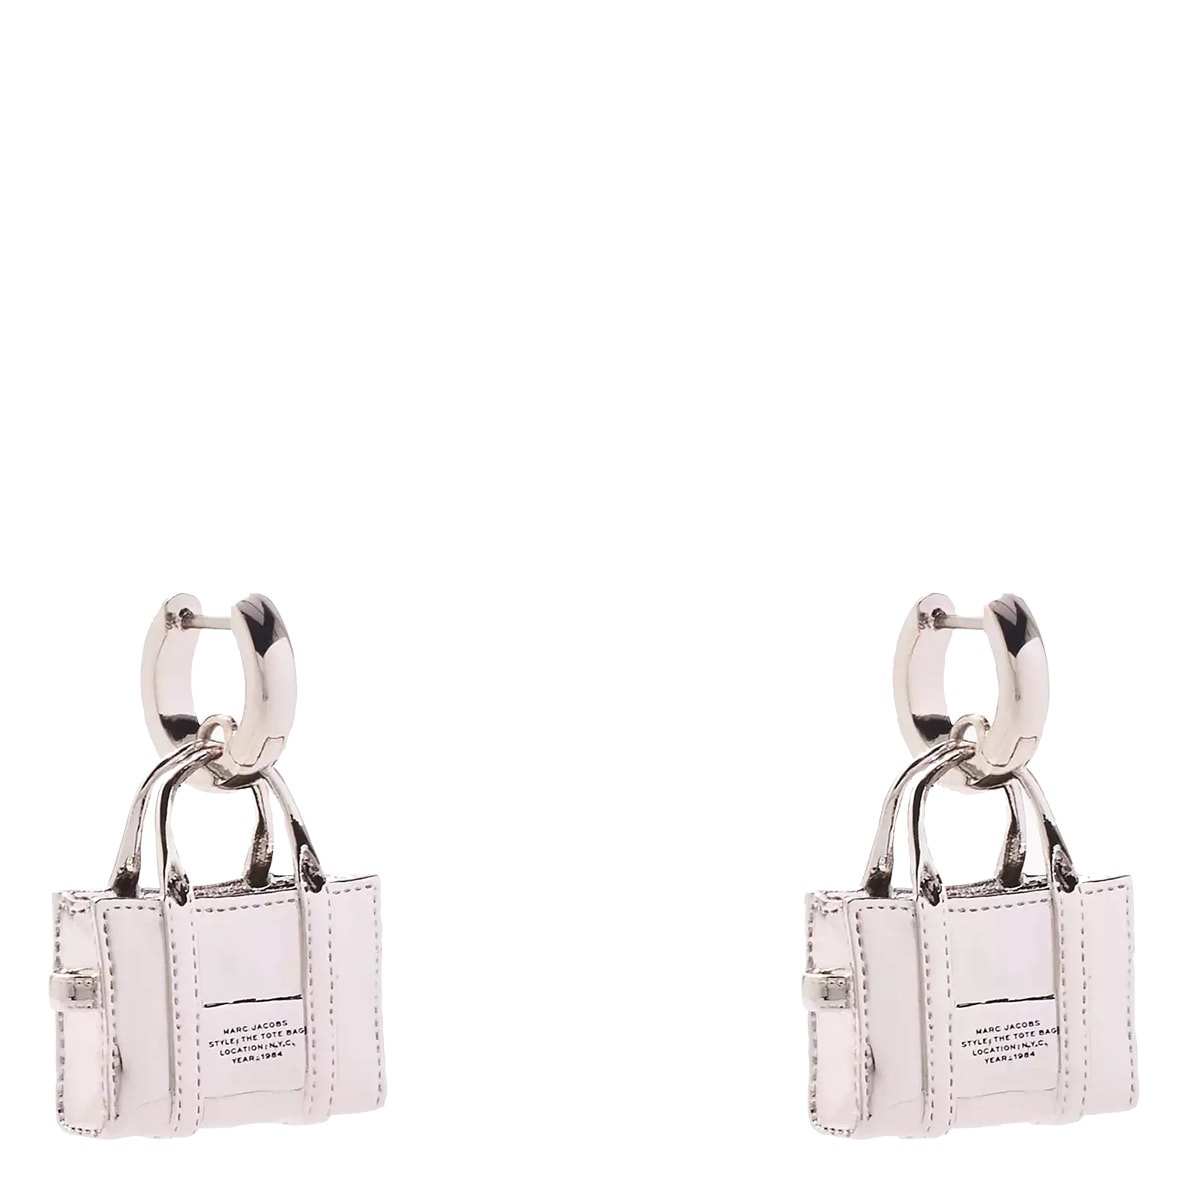 Shop Marc Jacobs The Tote Bag Earrings In Silver